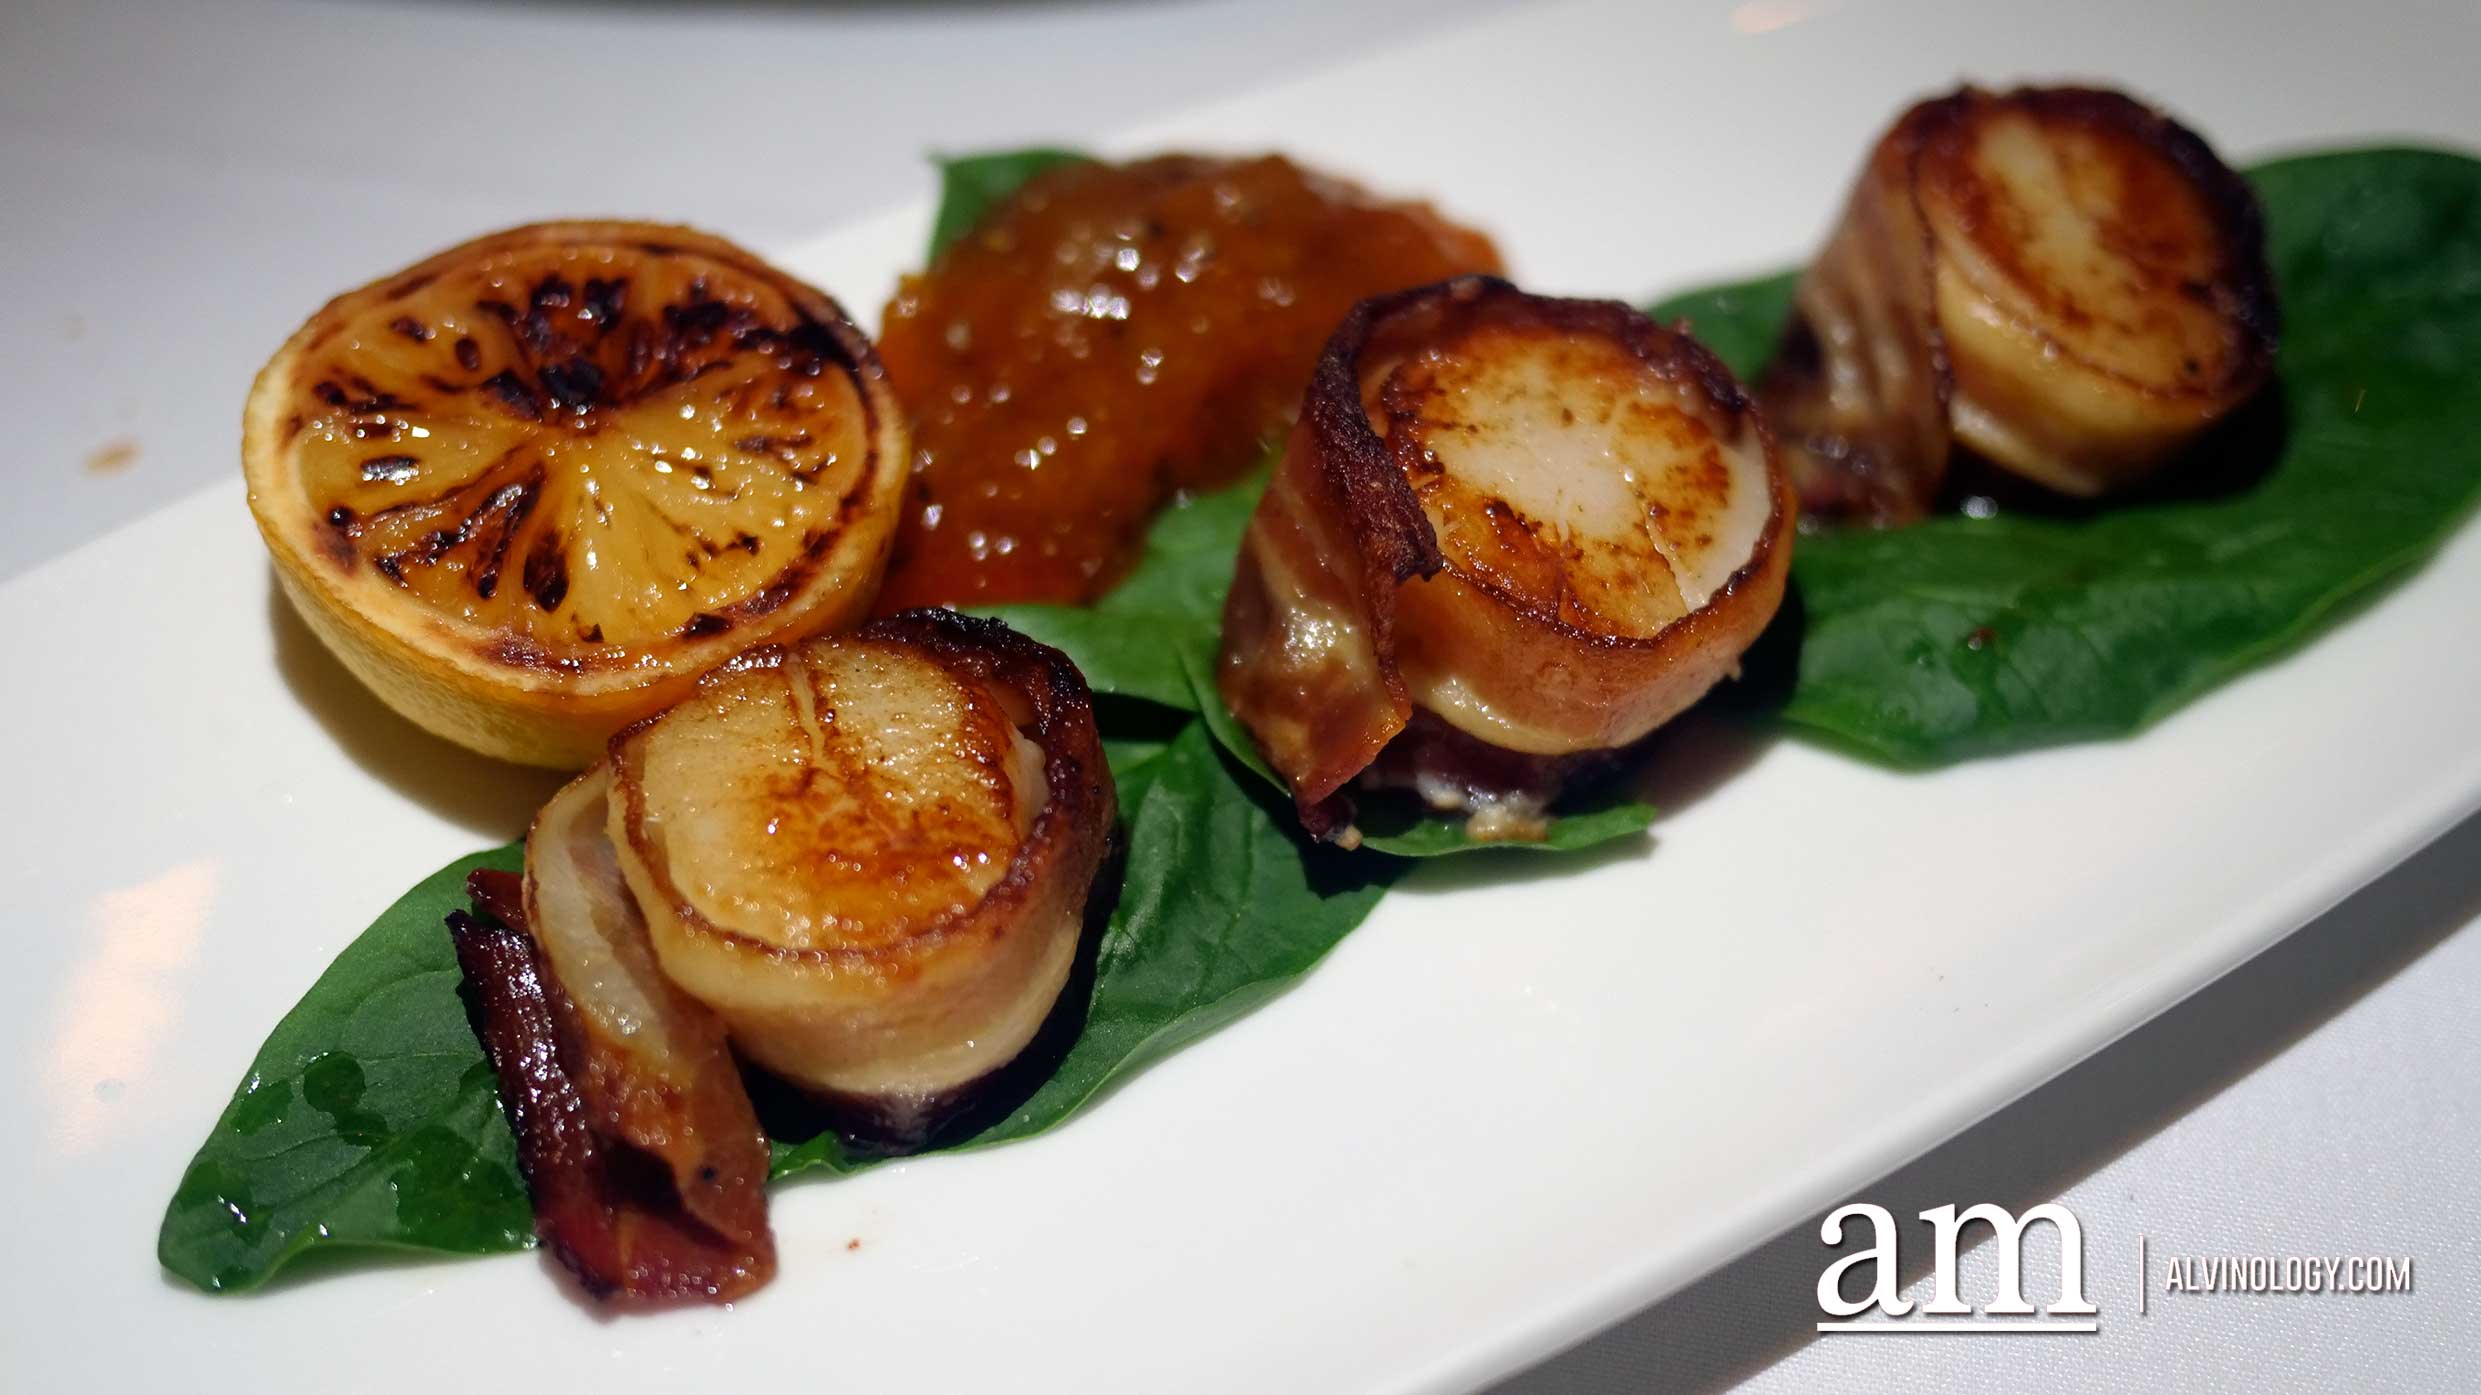 6. Broiled Sea Scallops wrapped in Bacon with Apricot Chutney